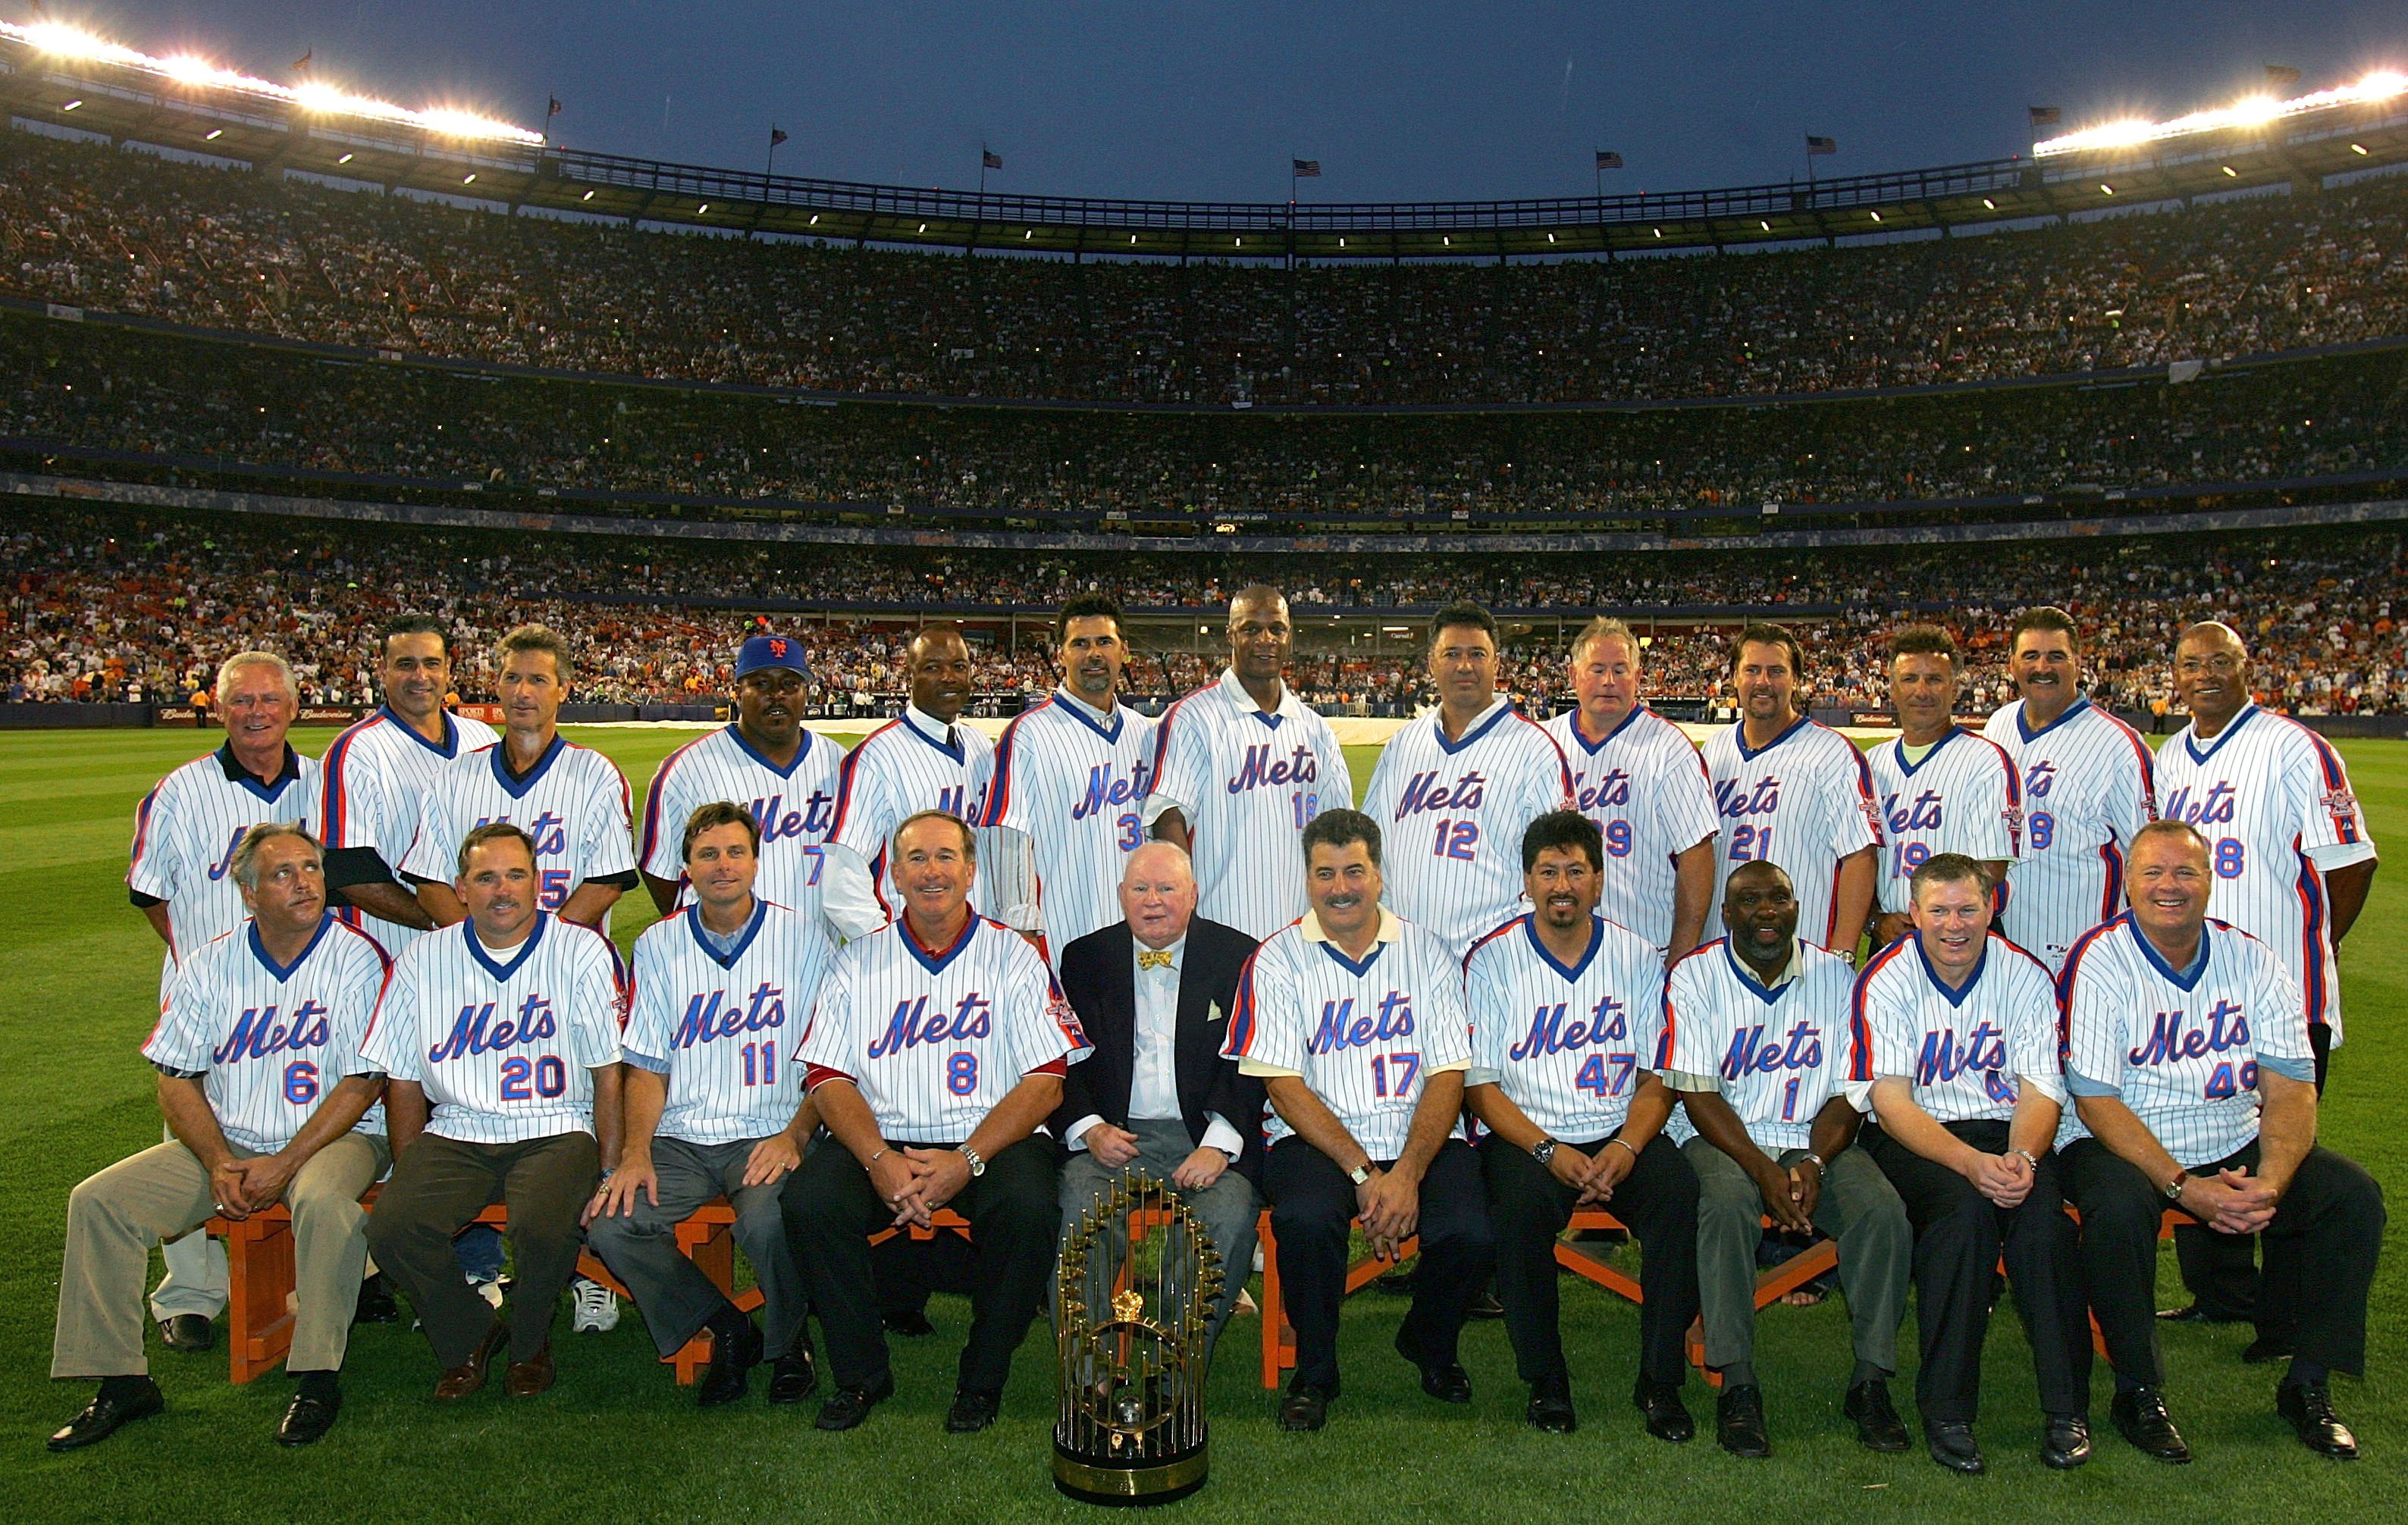 10 things you may not remember about the 1986 Mets